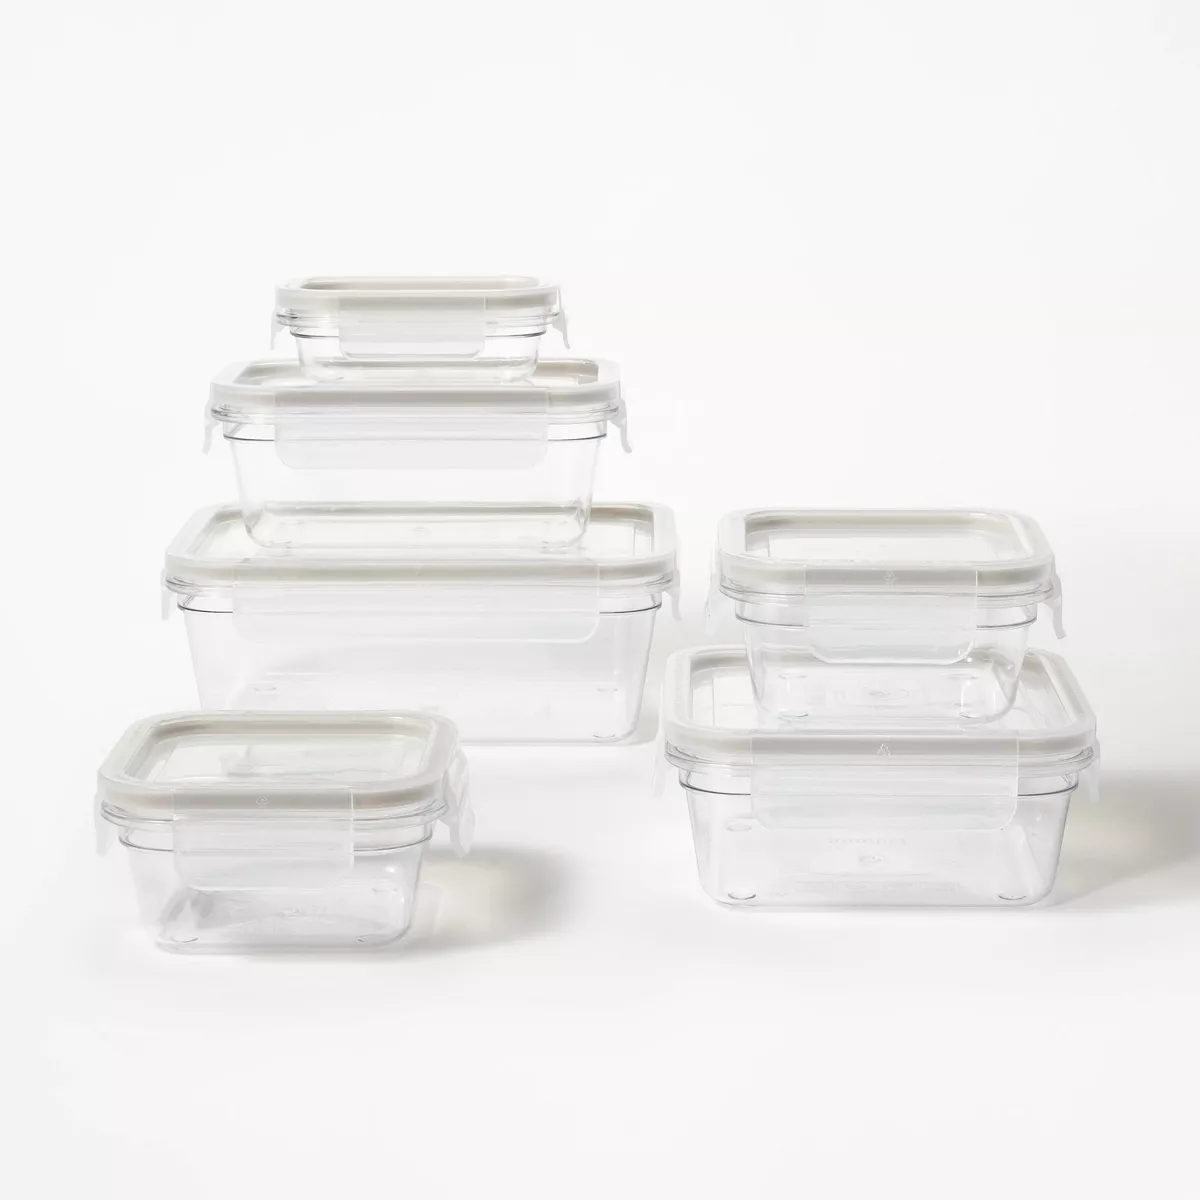 Figmint Round Cake Carrier White/Clear - Figmint